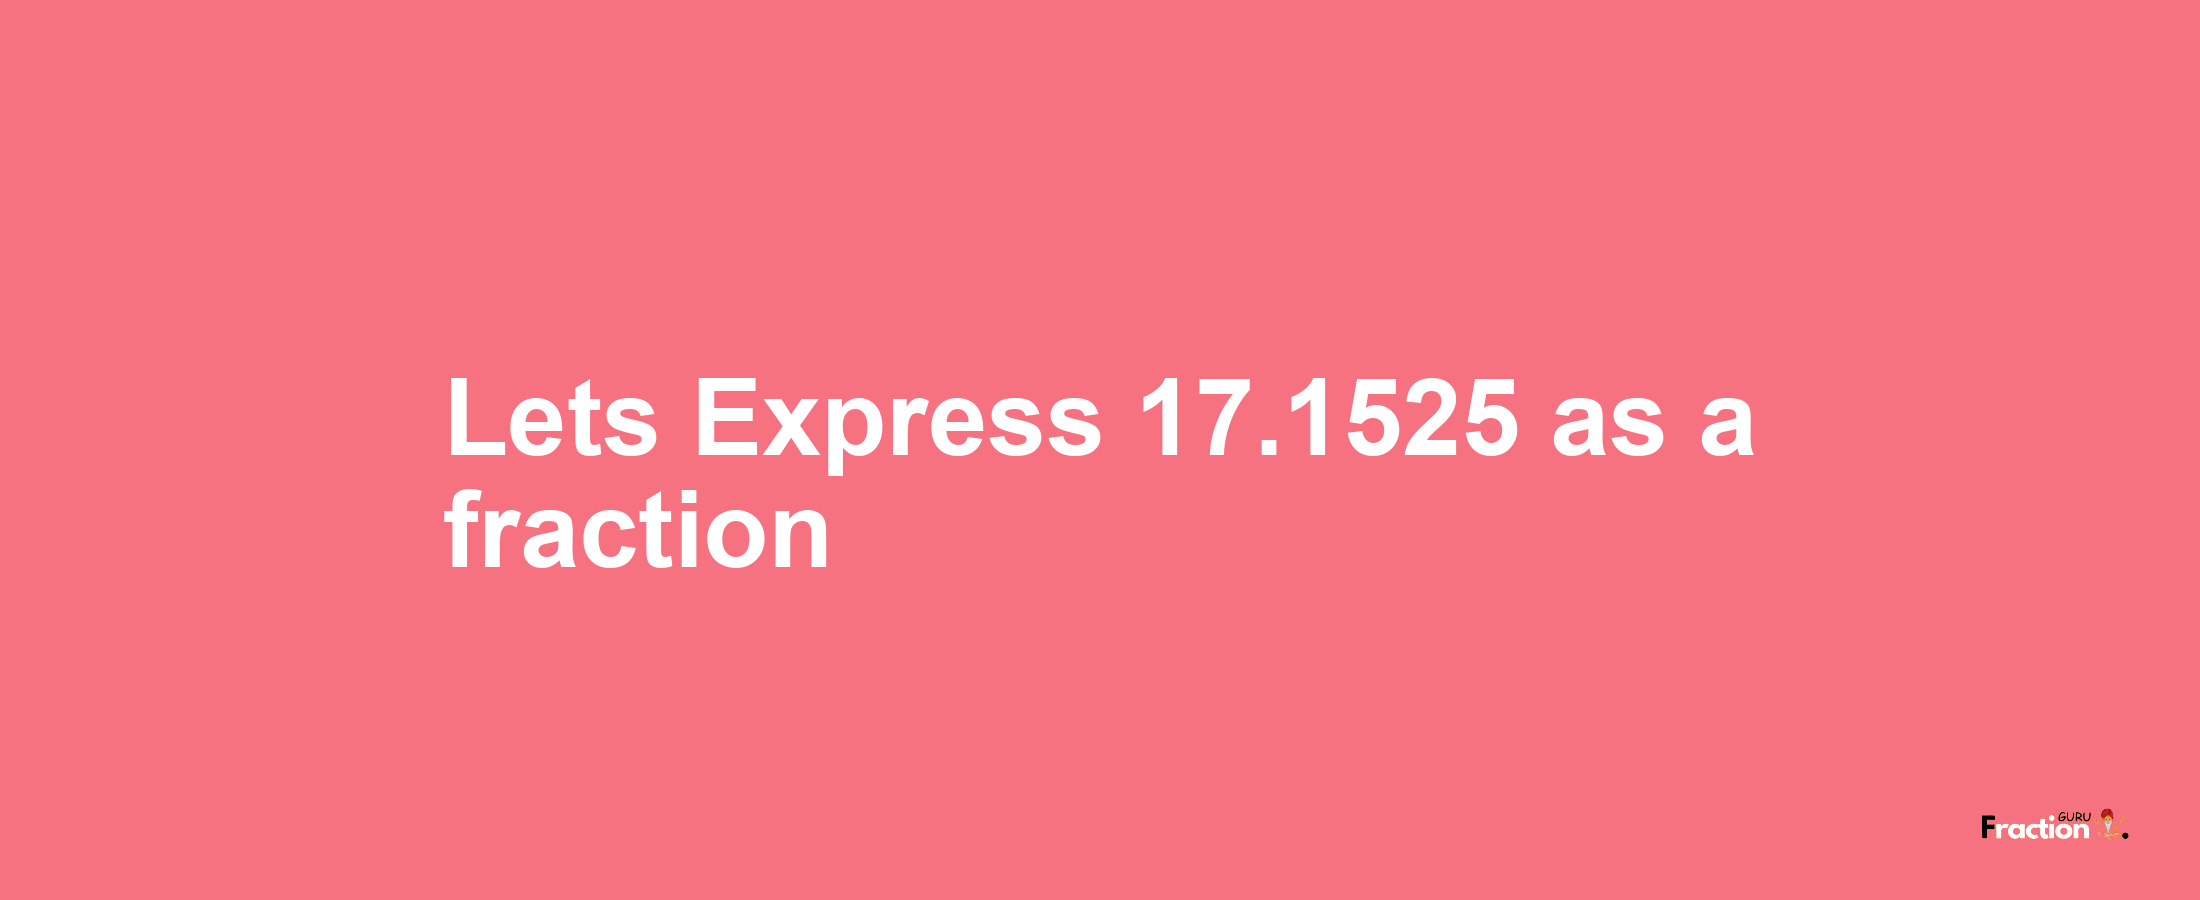 Lets Express 17.1525 as afraction